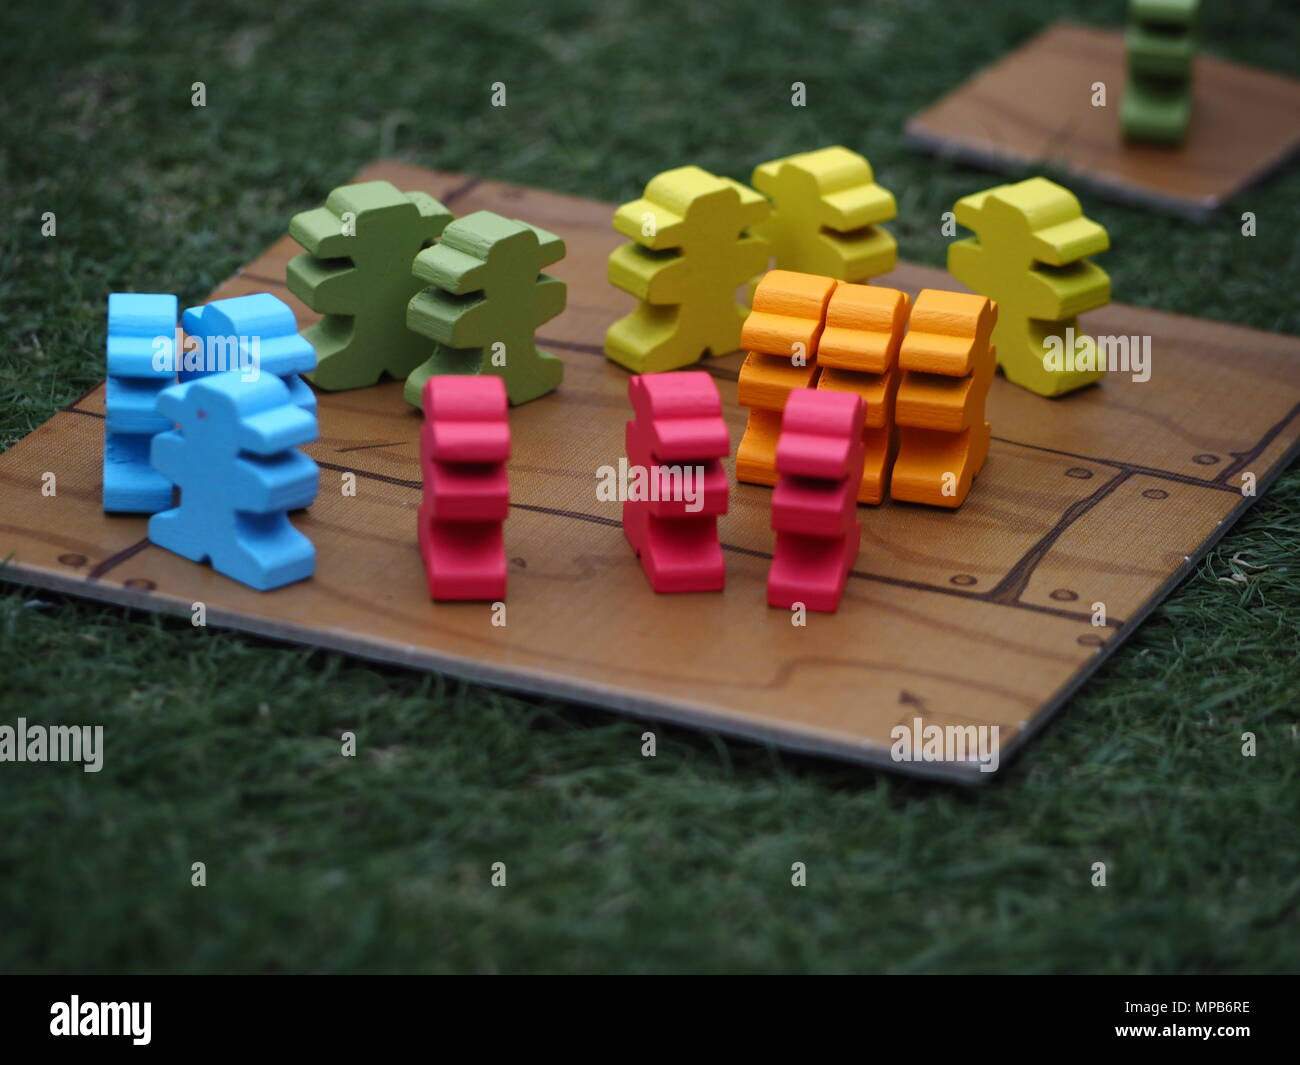 Multi-coloured pirate-themed board game pieces in the shape of men representing teams, on a wooden platform on grass. Stock Photo